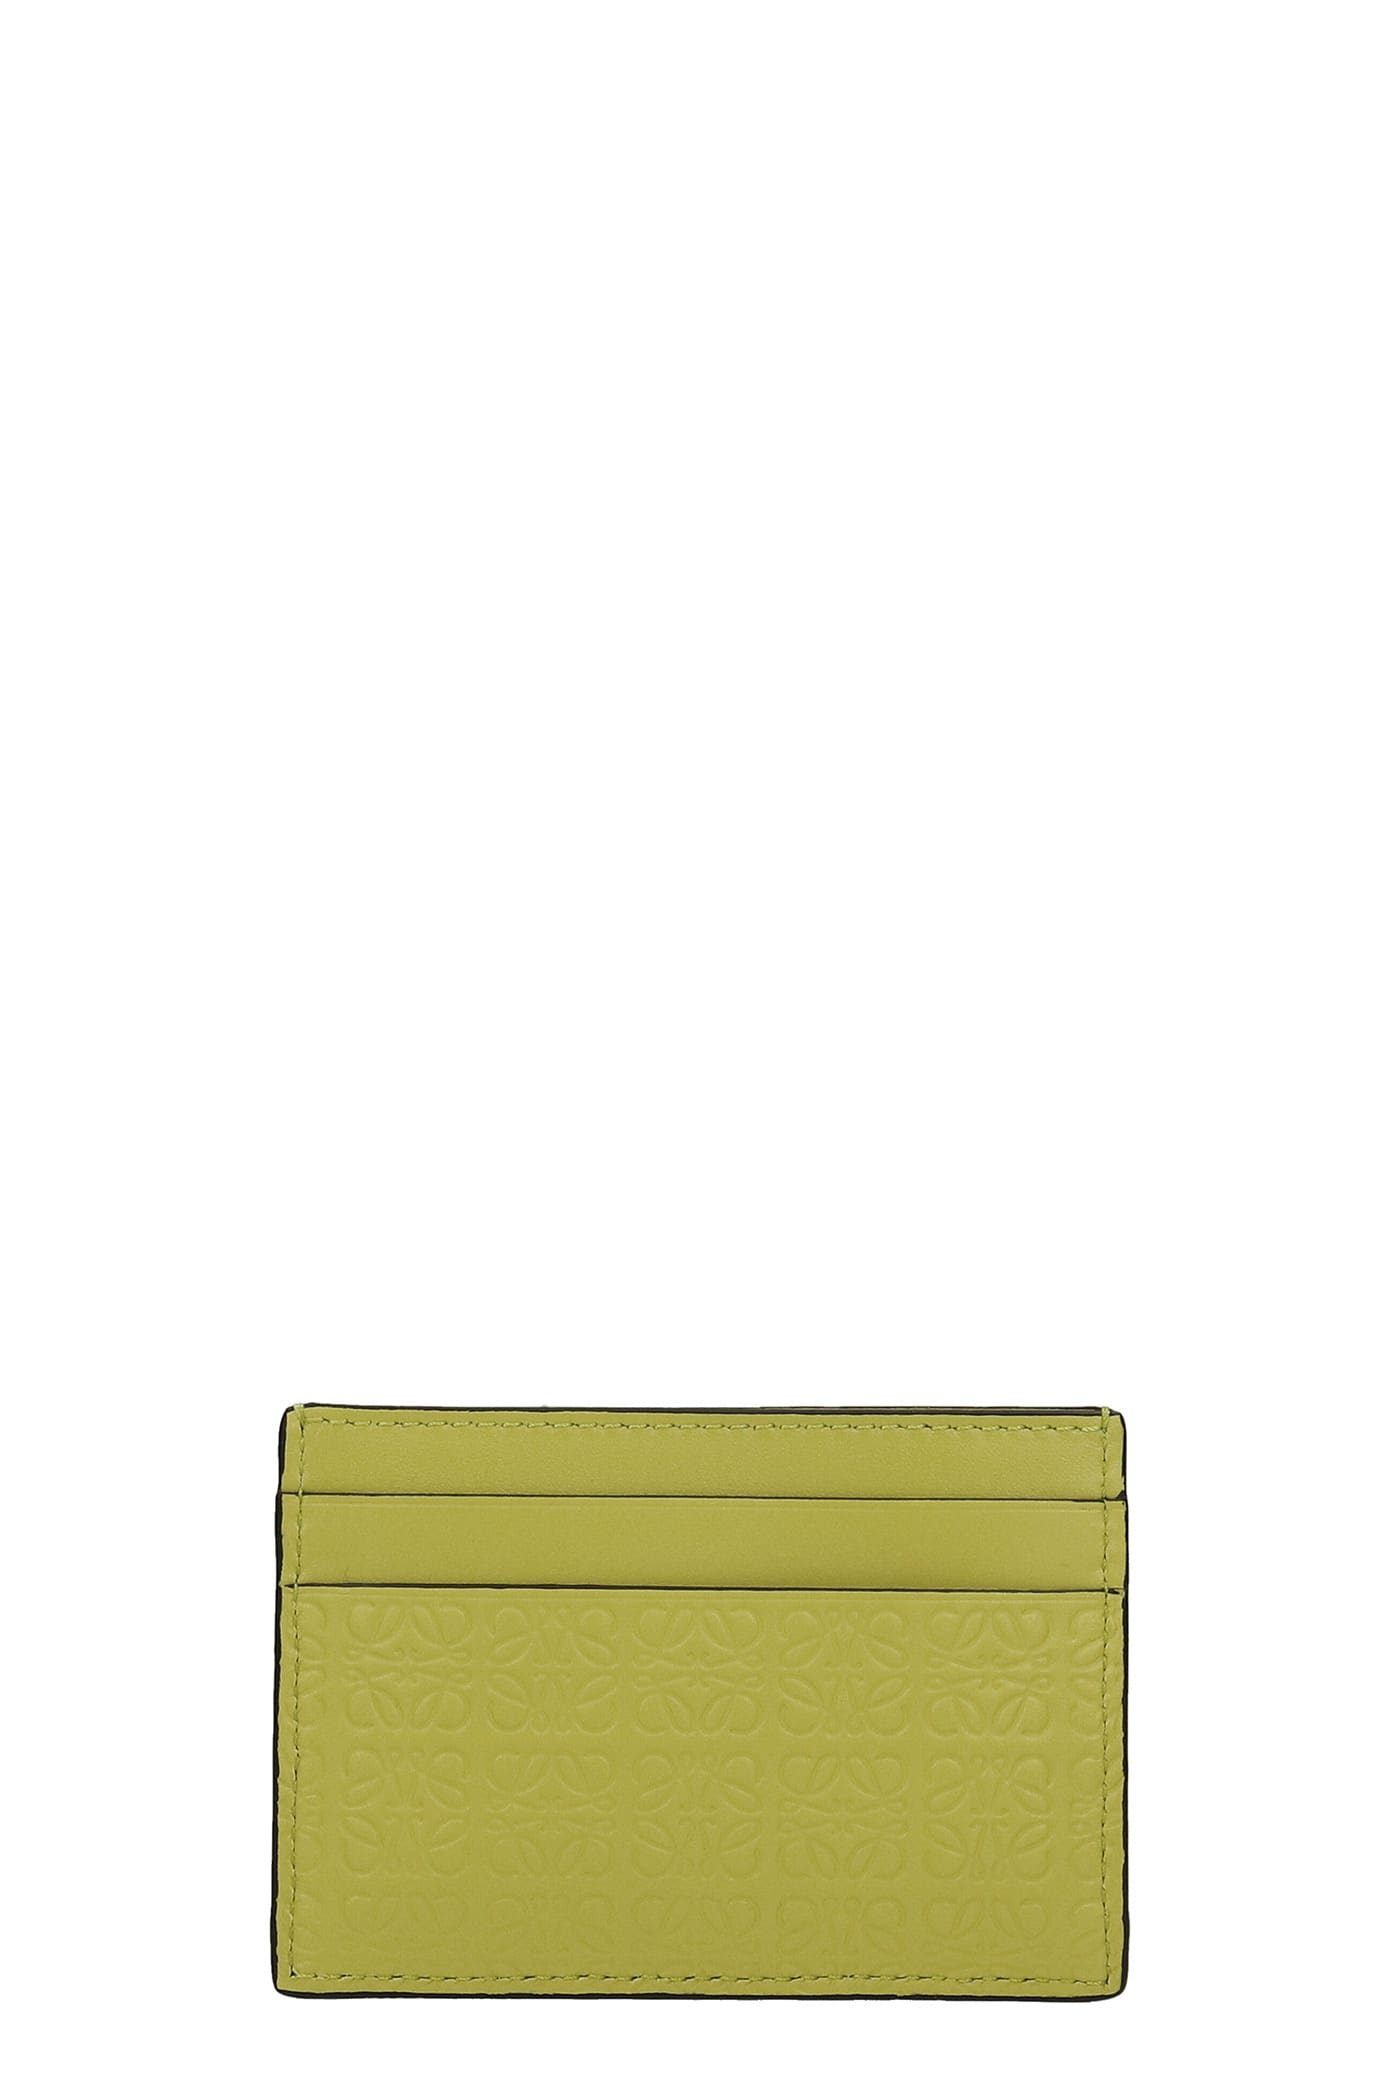 Loewe Repeat Plain Wallet In Yellow Leather